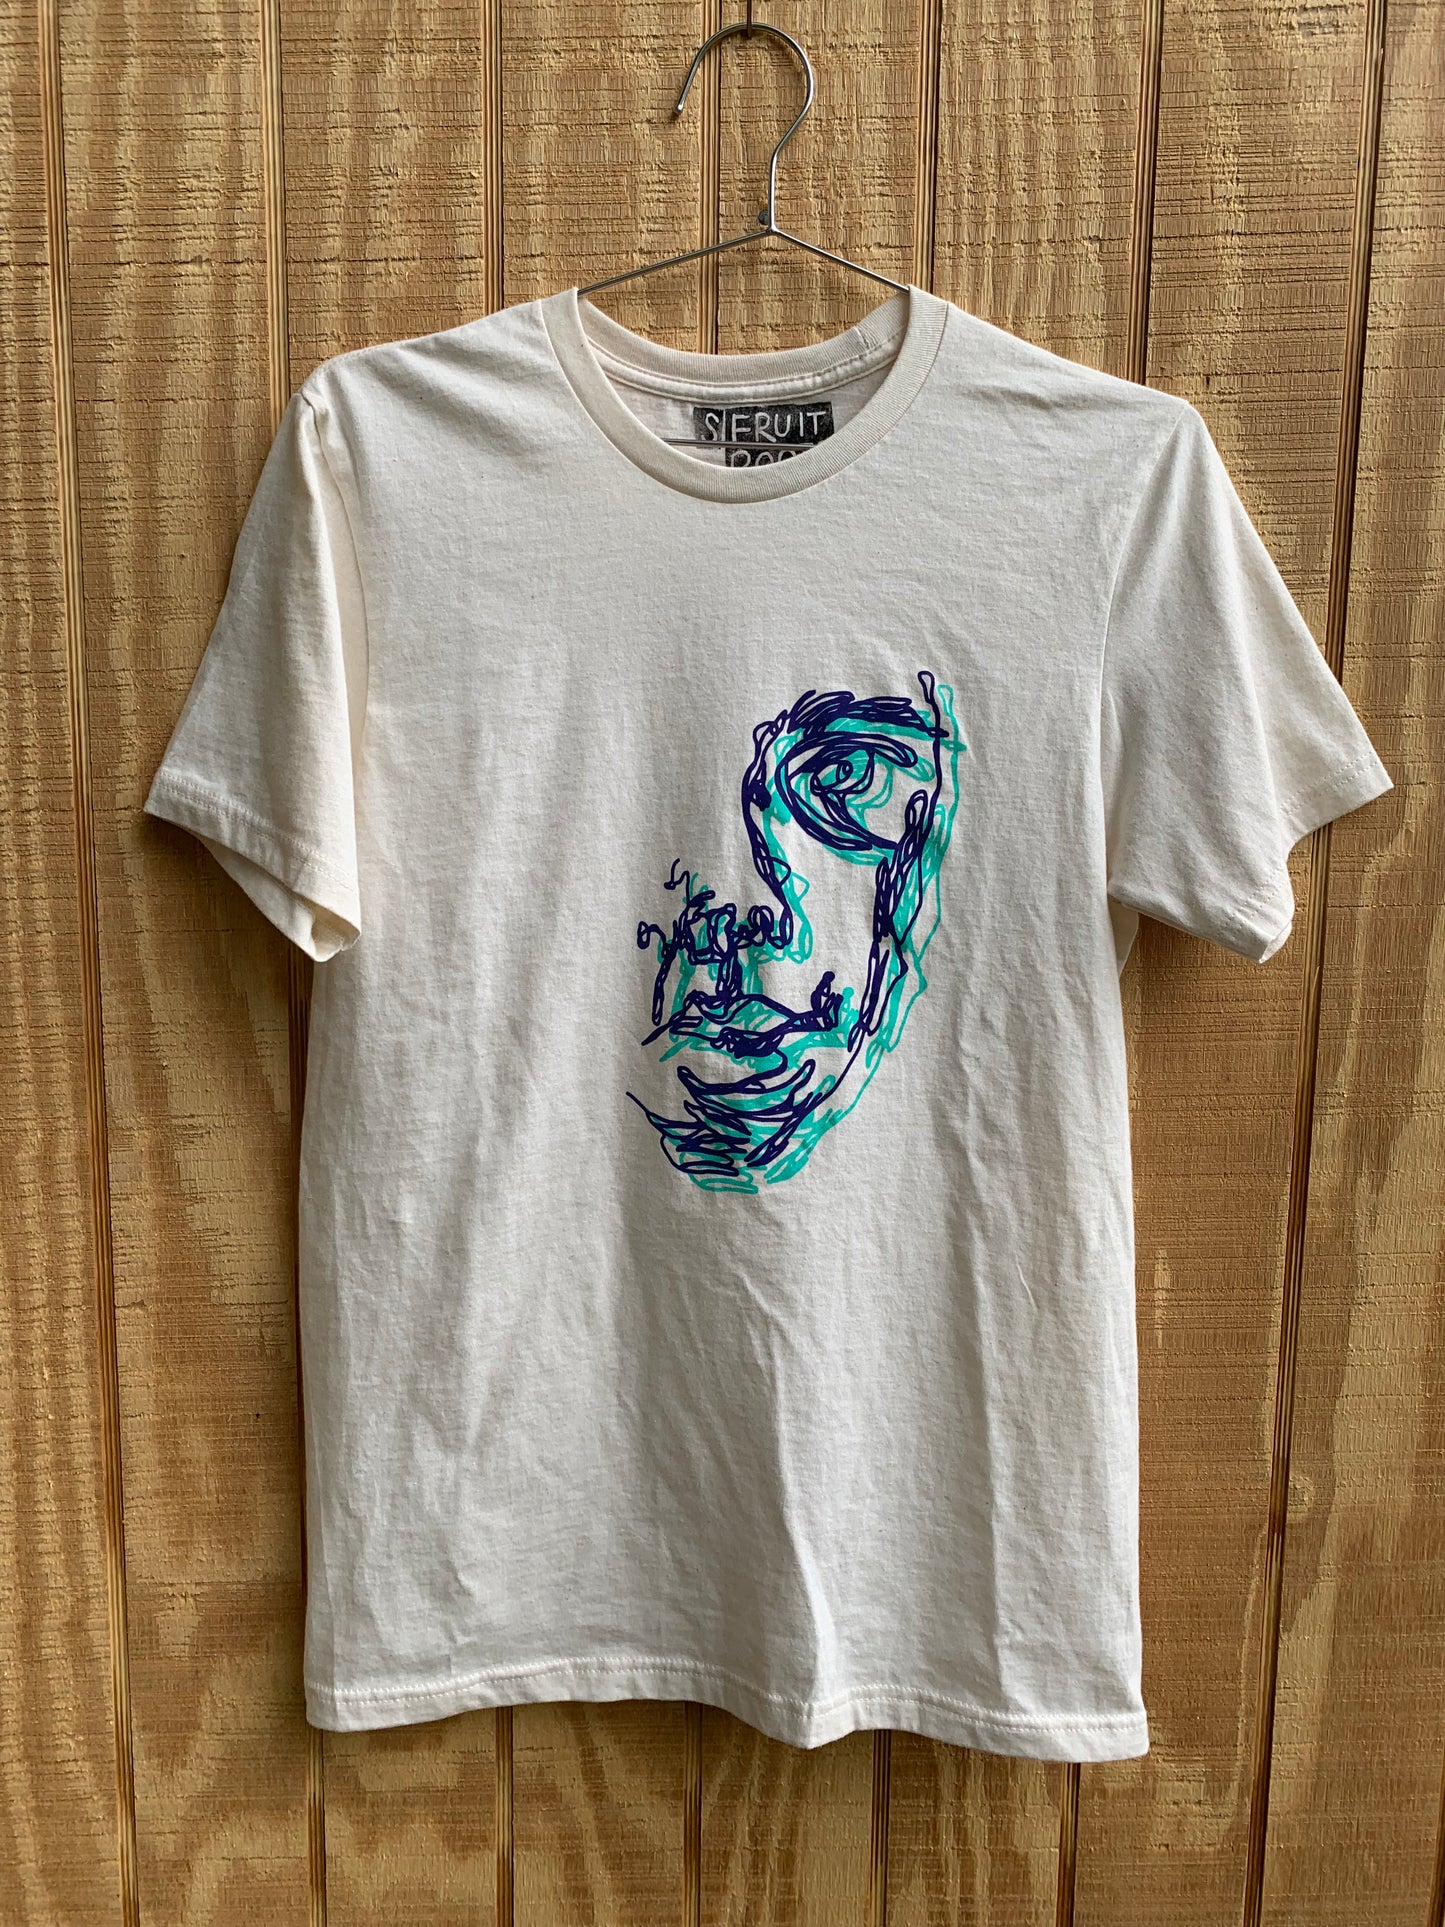 Off-white t shirt with purple and teal overlapping blind contour drawings of a face 